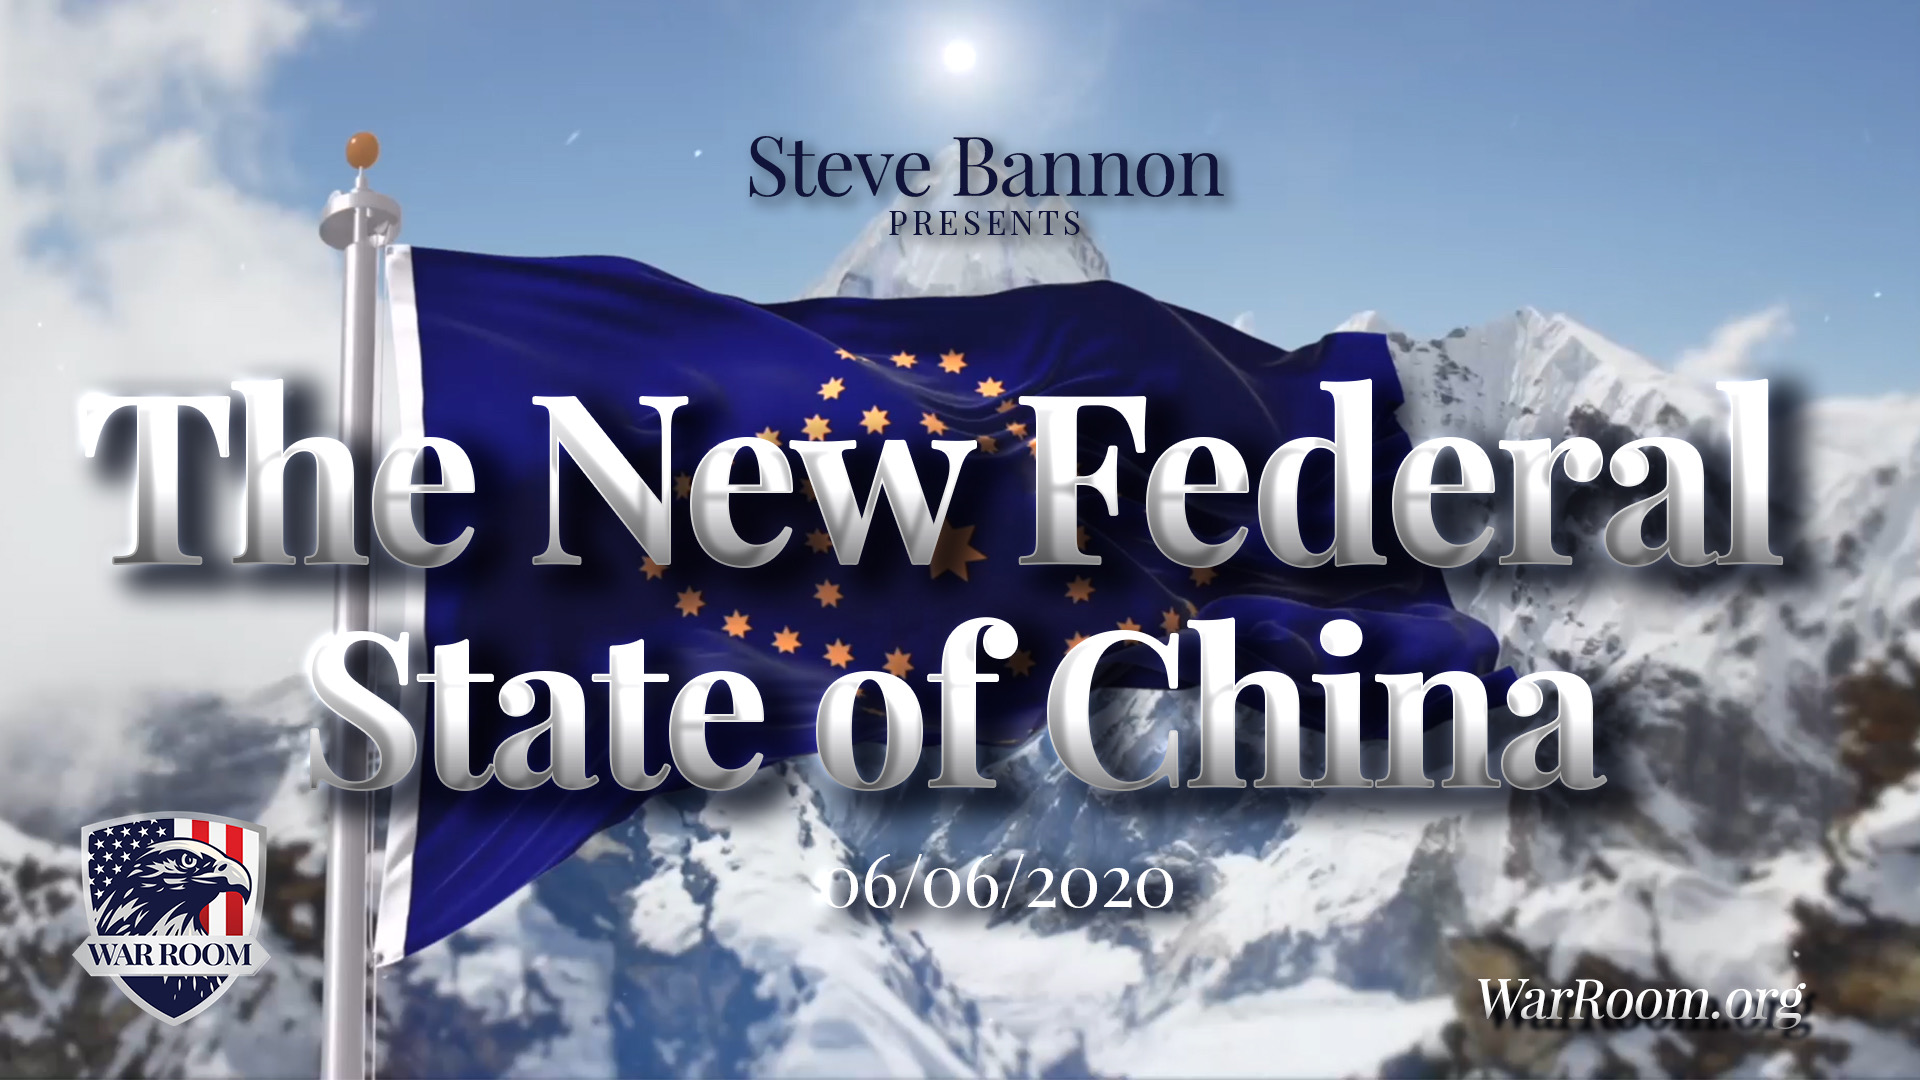 Steve Bannon Presents ‘The New Federal State of China’